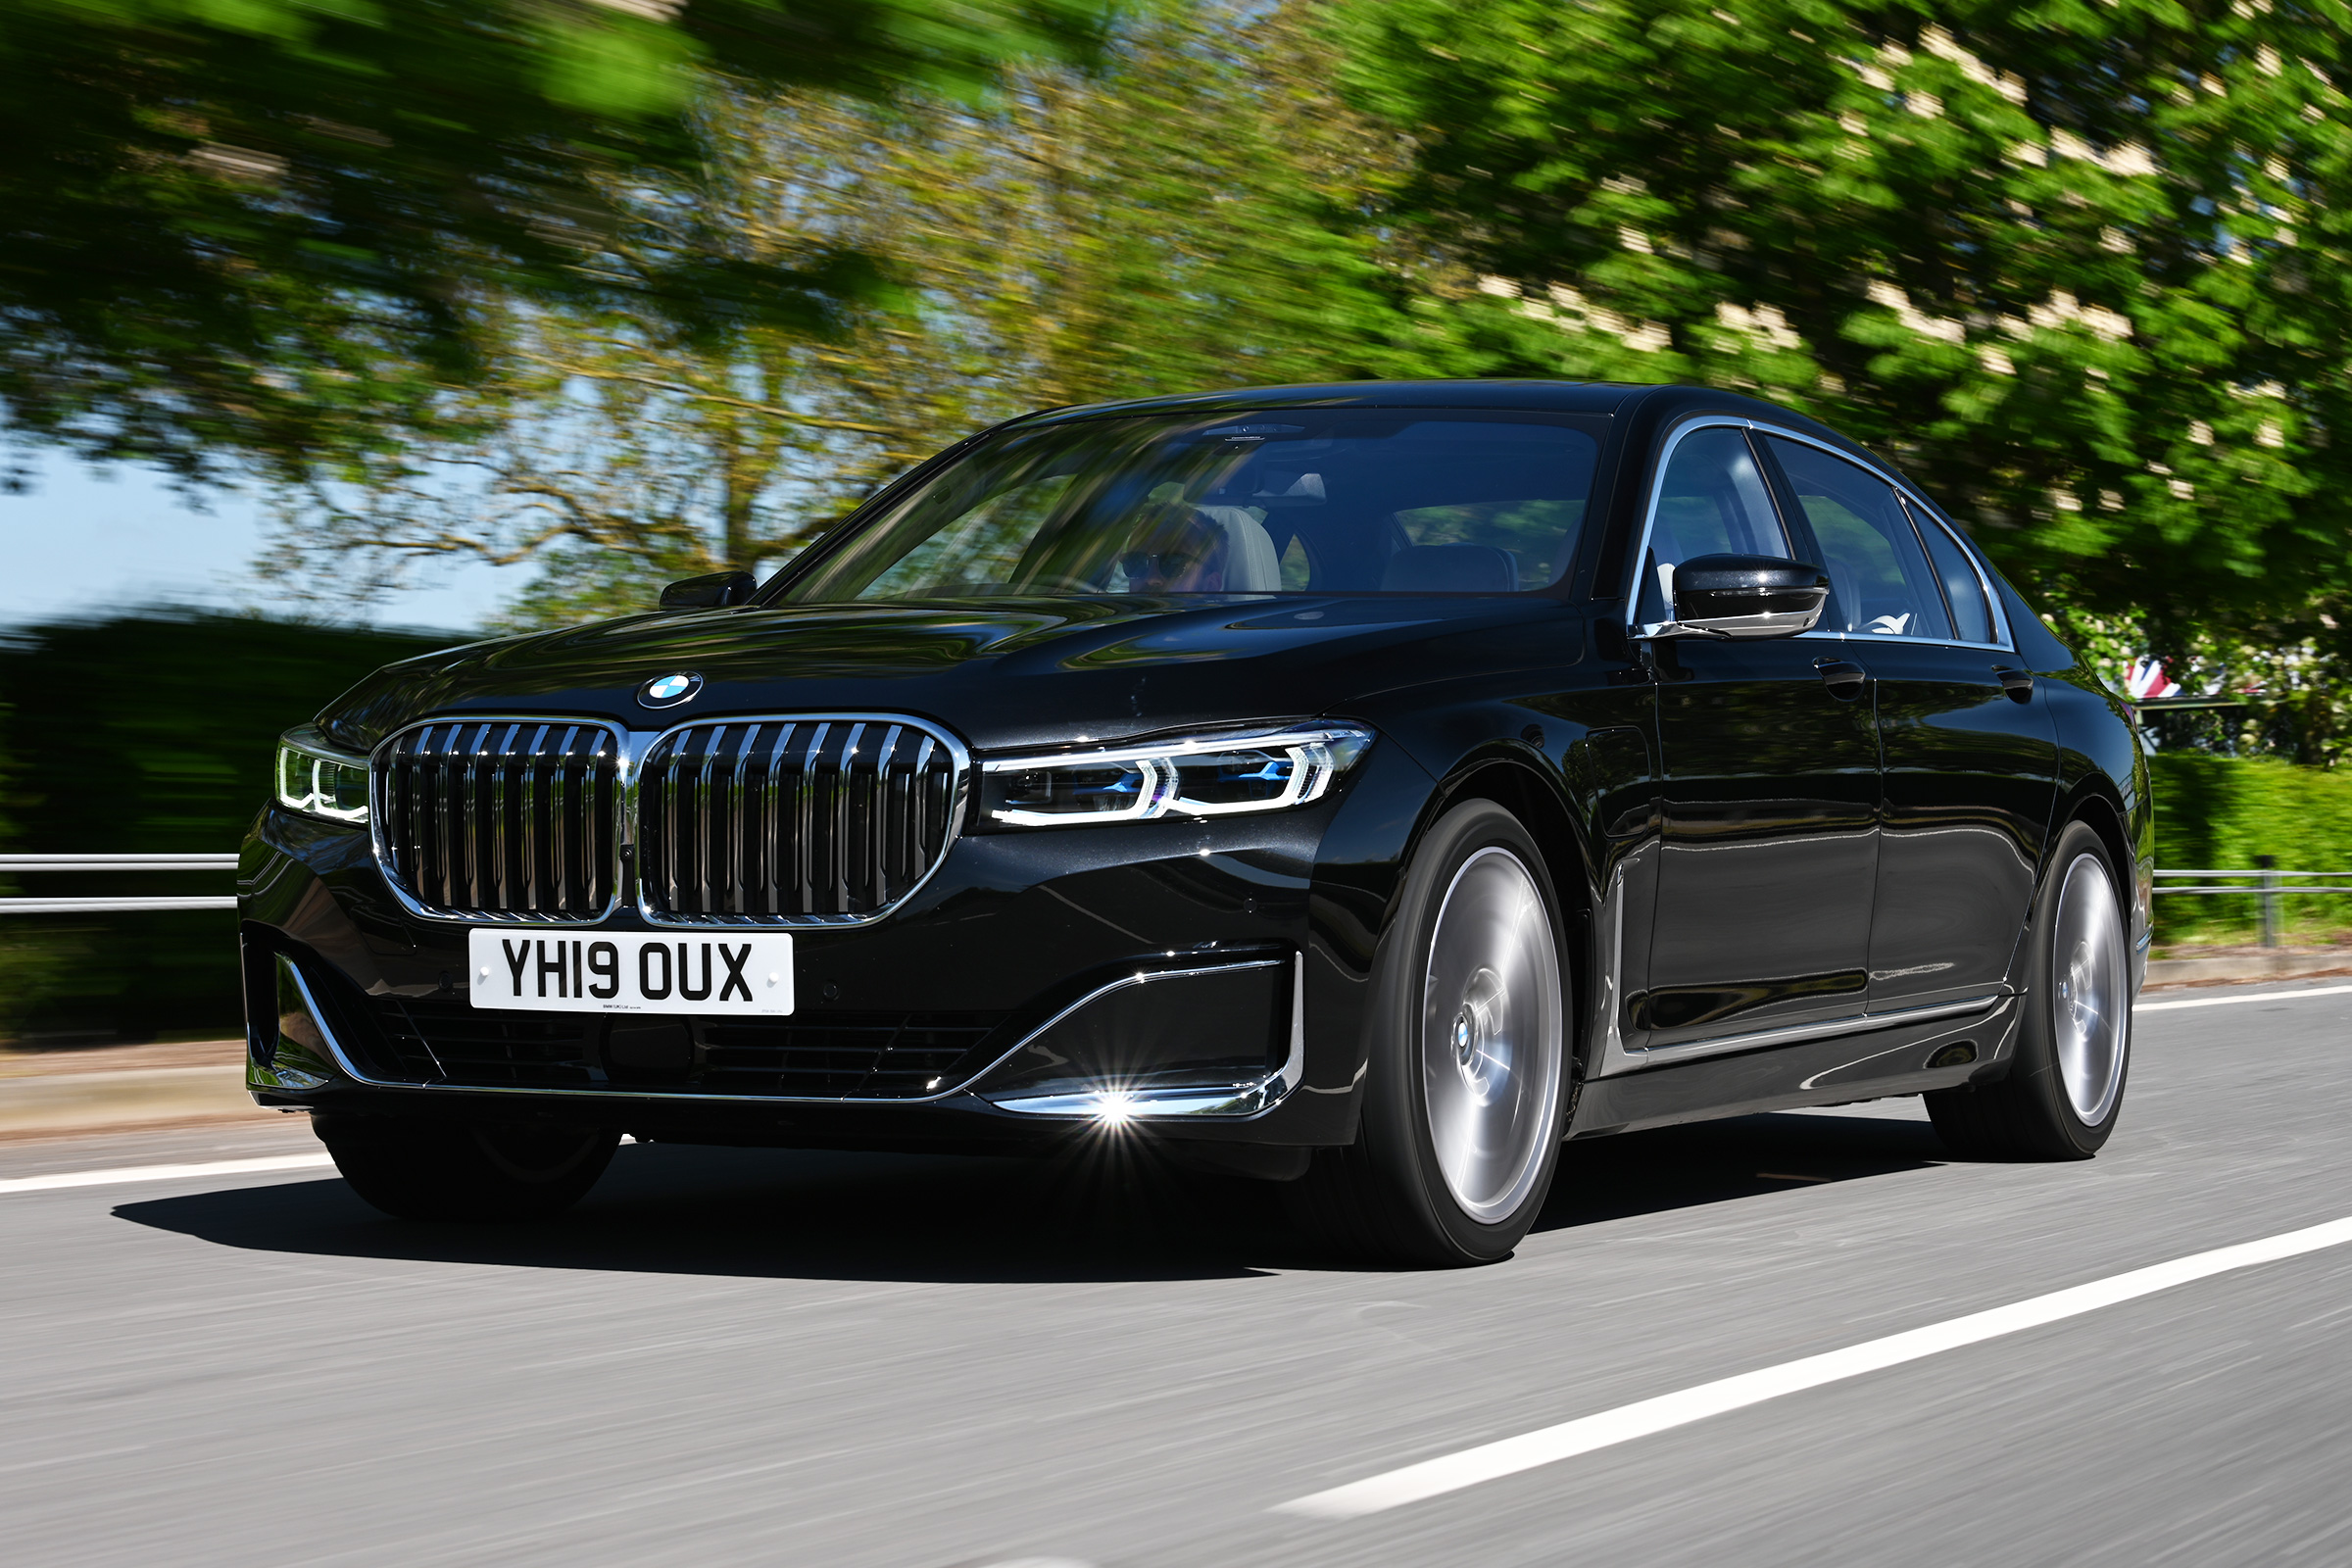 The All New BMW 7 Series: Luxury Reimagined